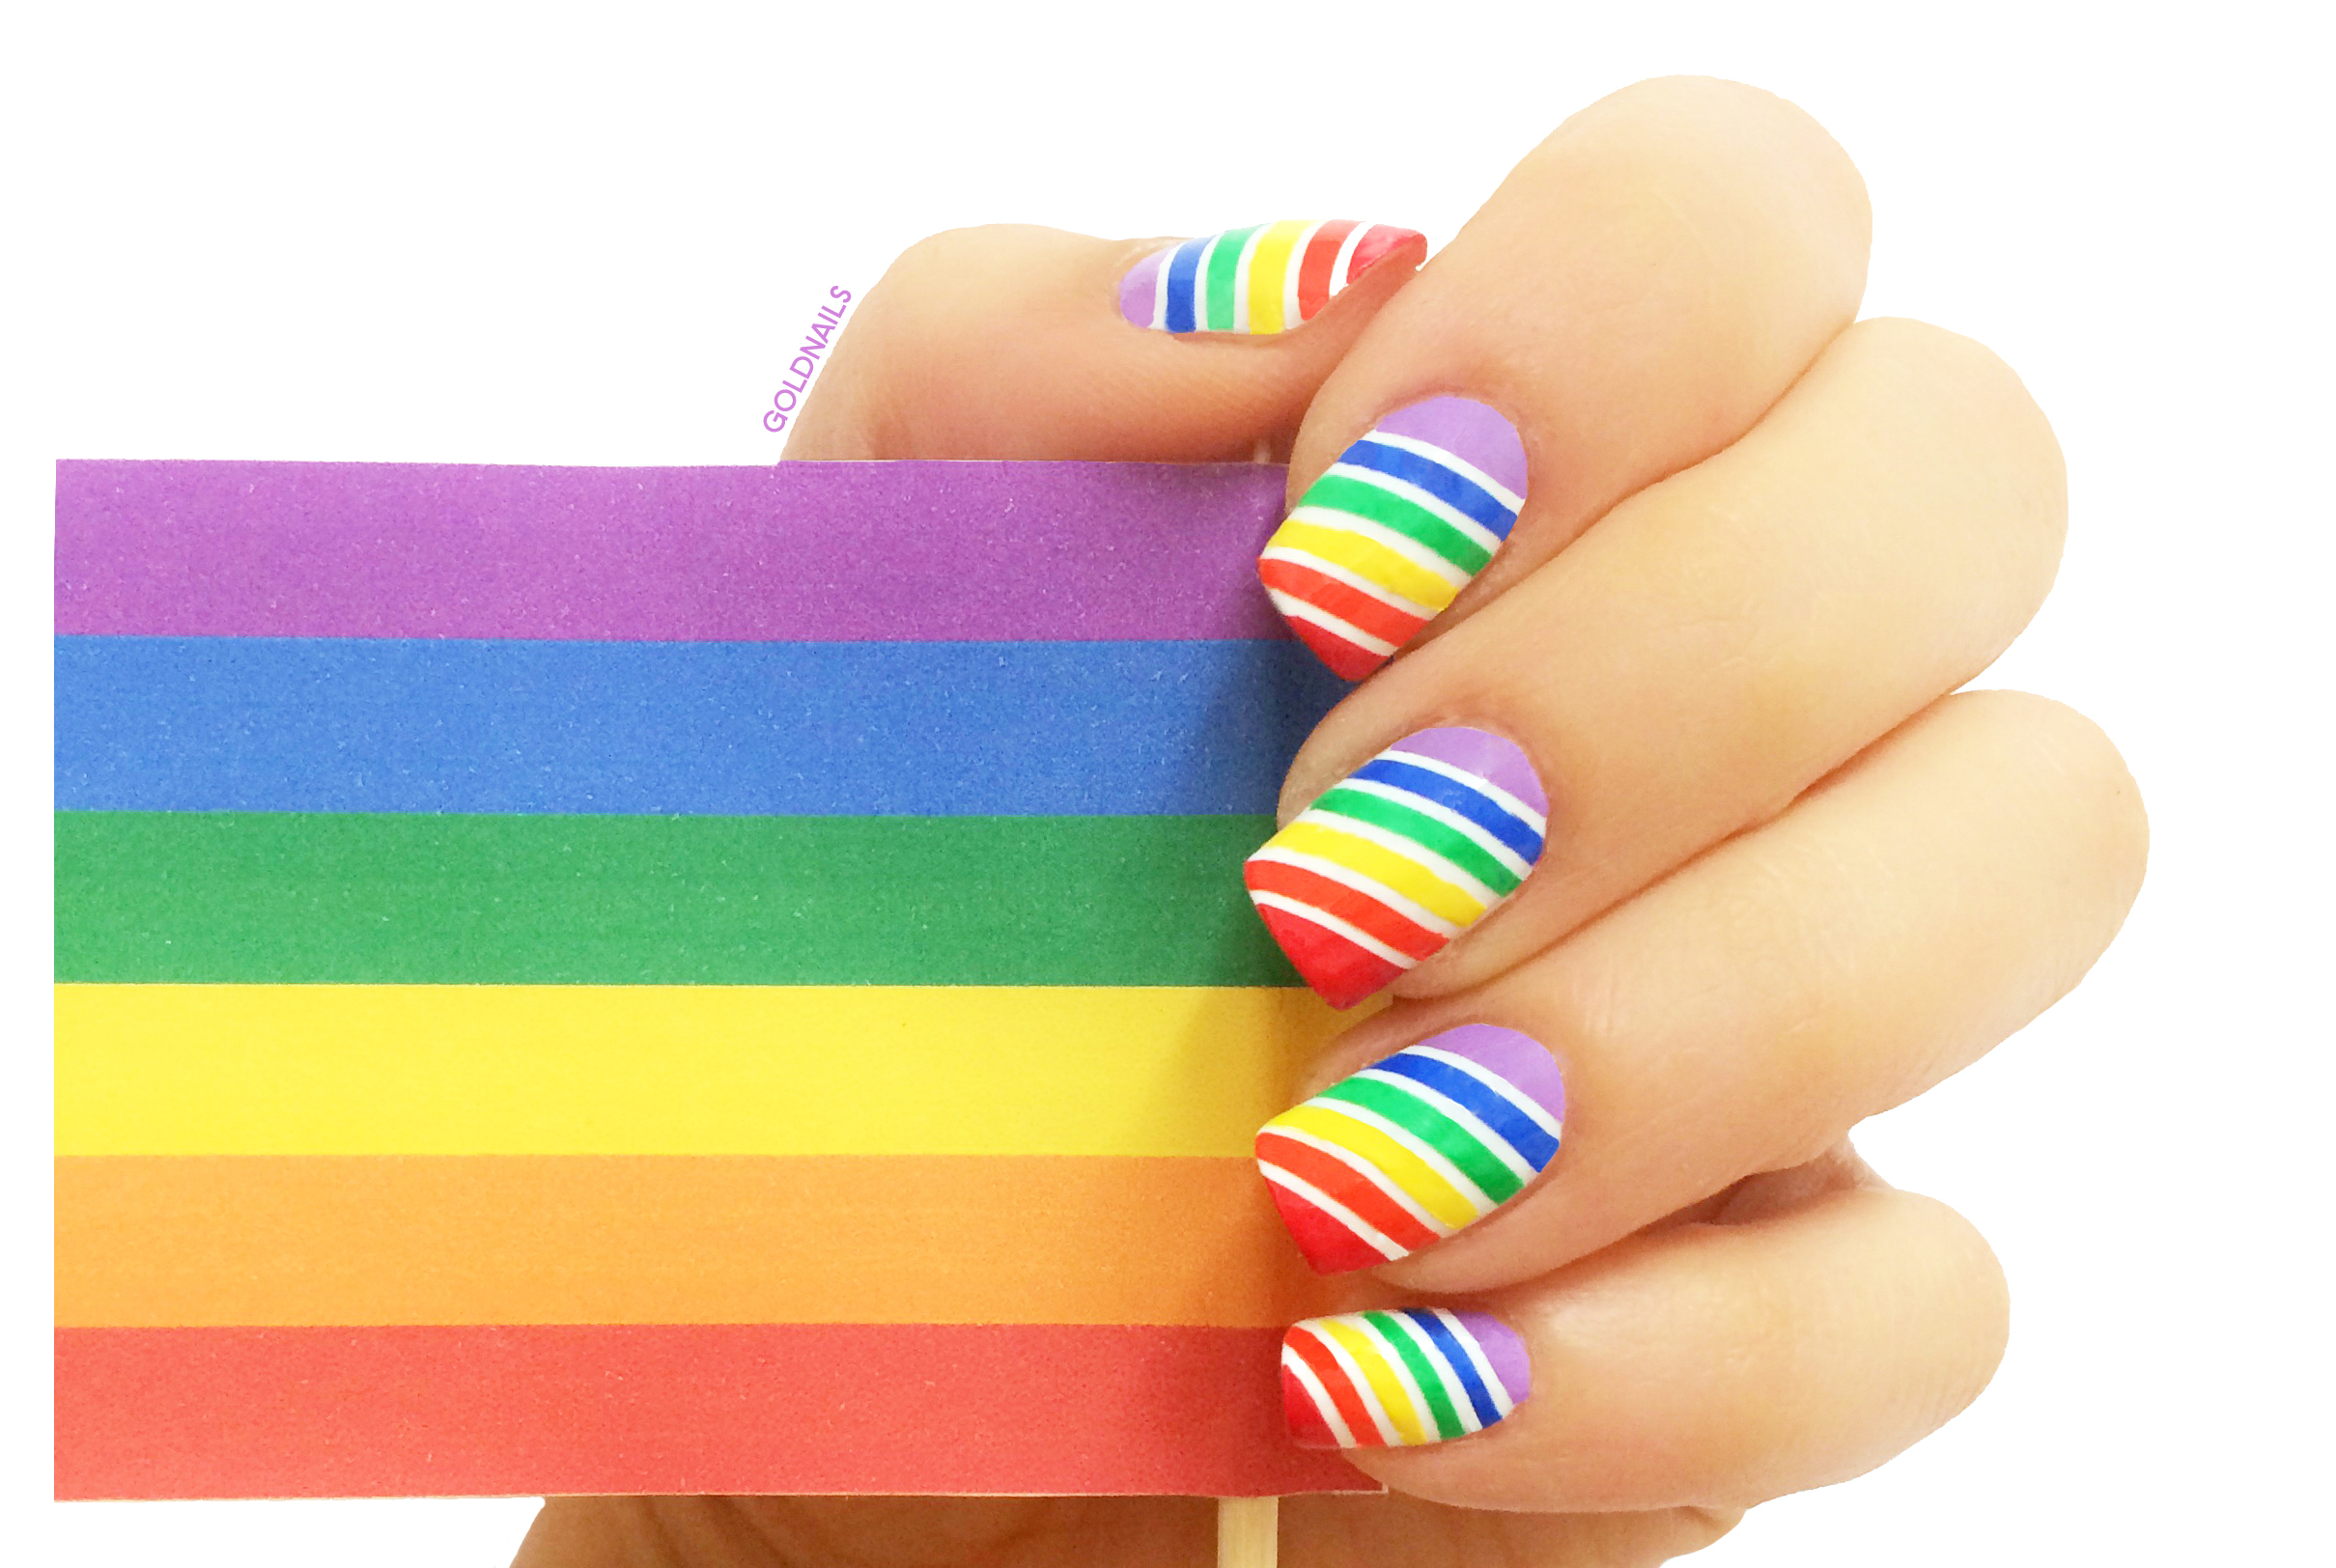 9. Asexual Flag Nail Art Designs for Pride Month - wide 8